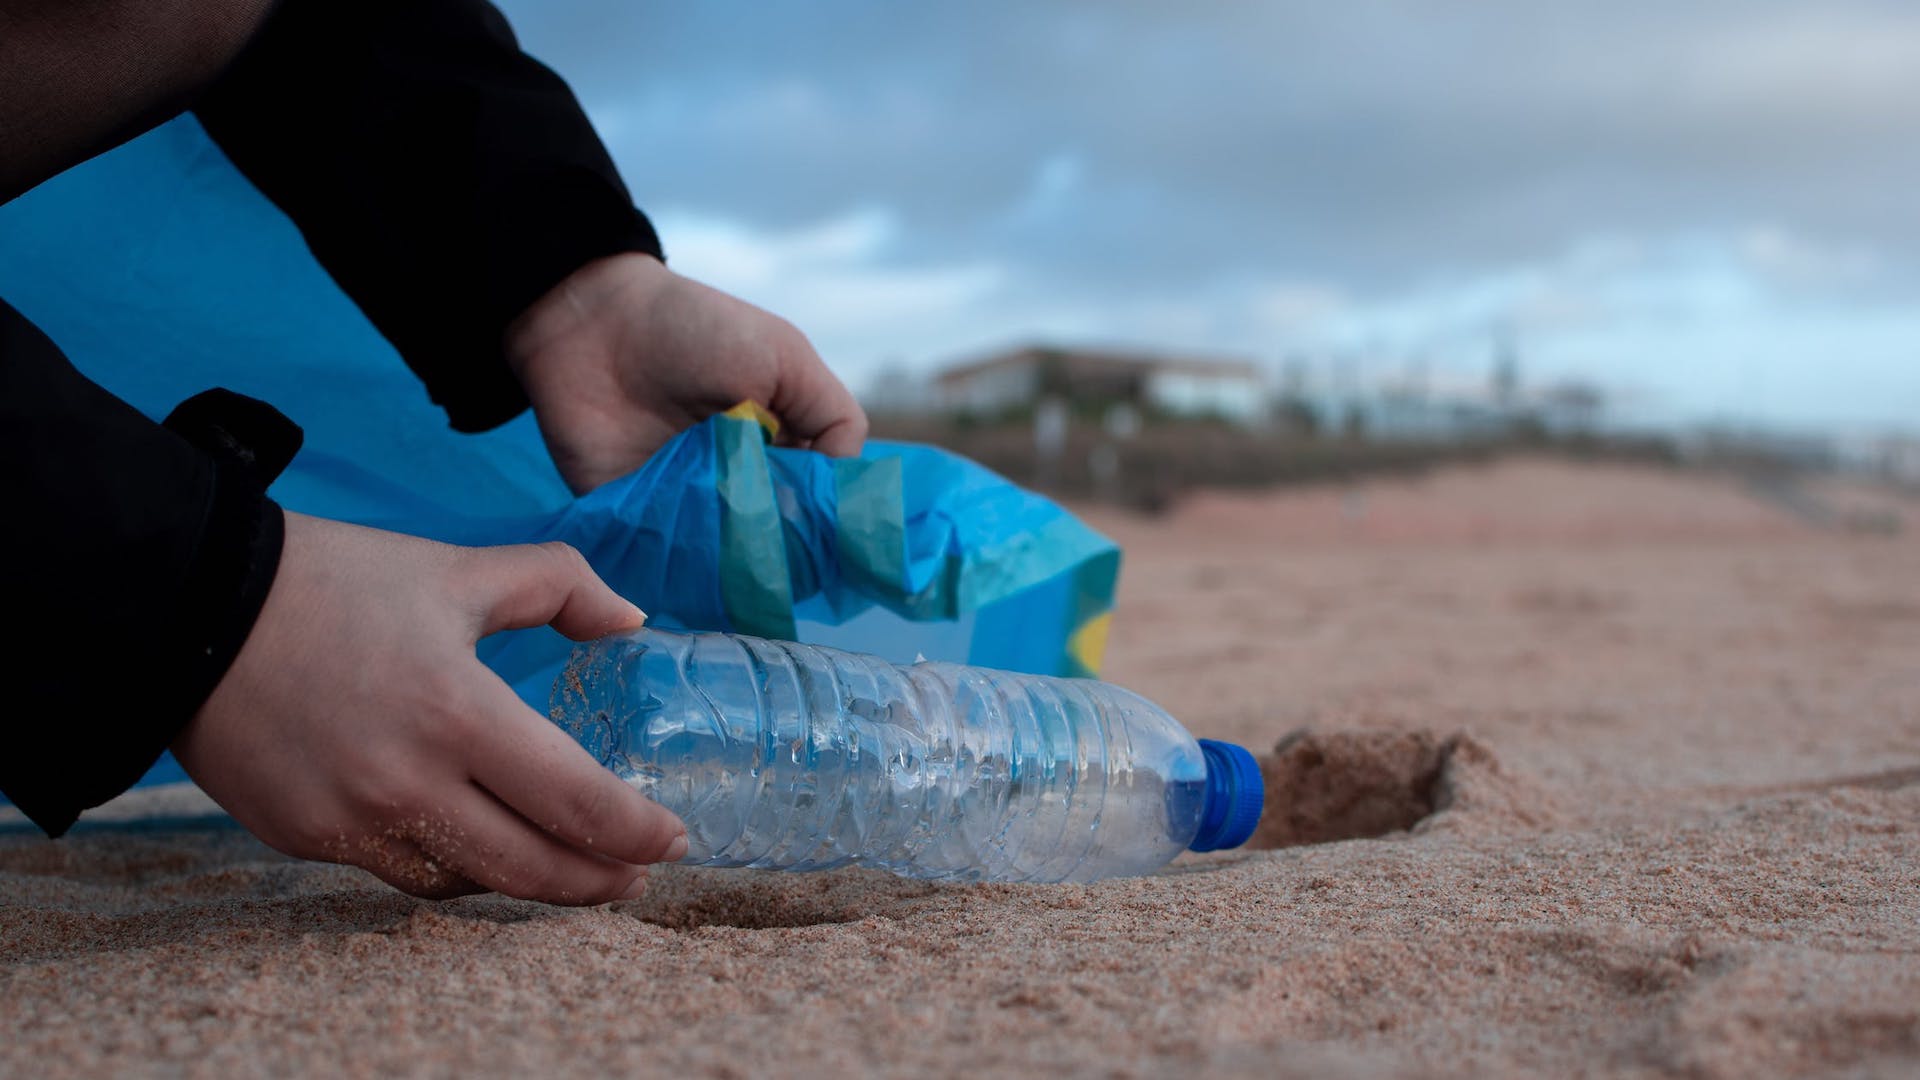 Plastic pollution: many Brits think bottled water is safer despite UK tap water being "among the best in the world"